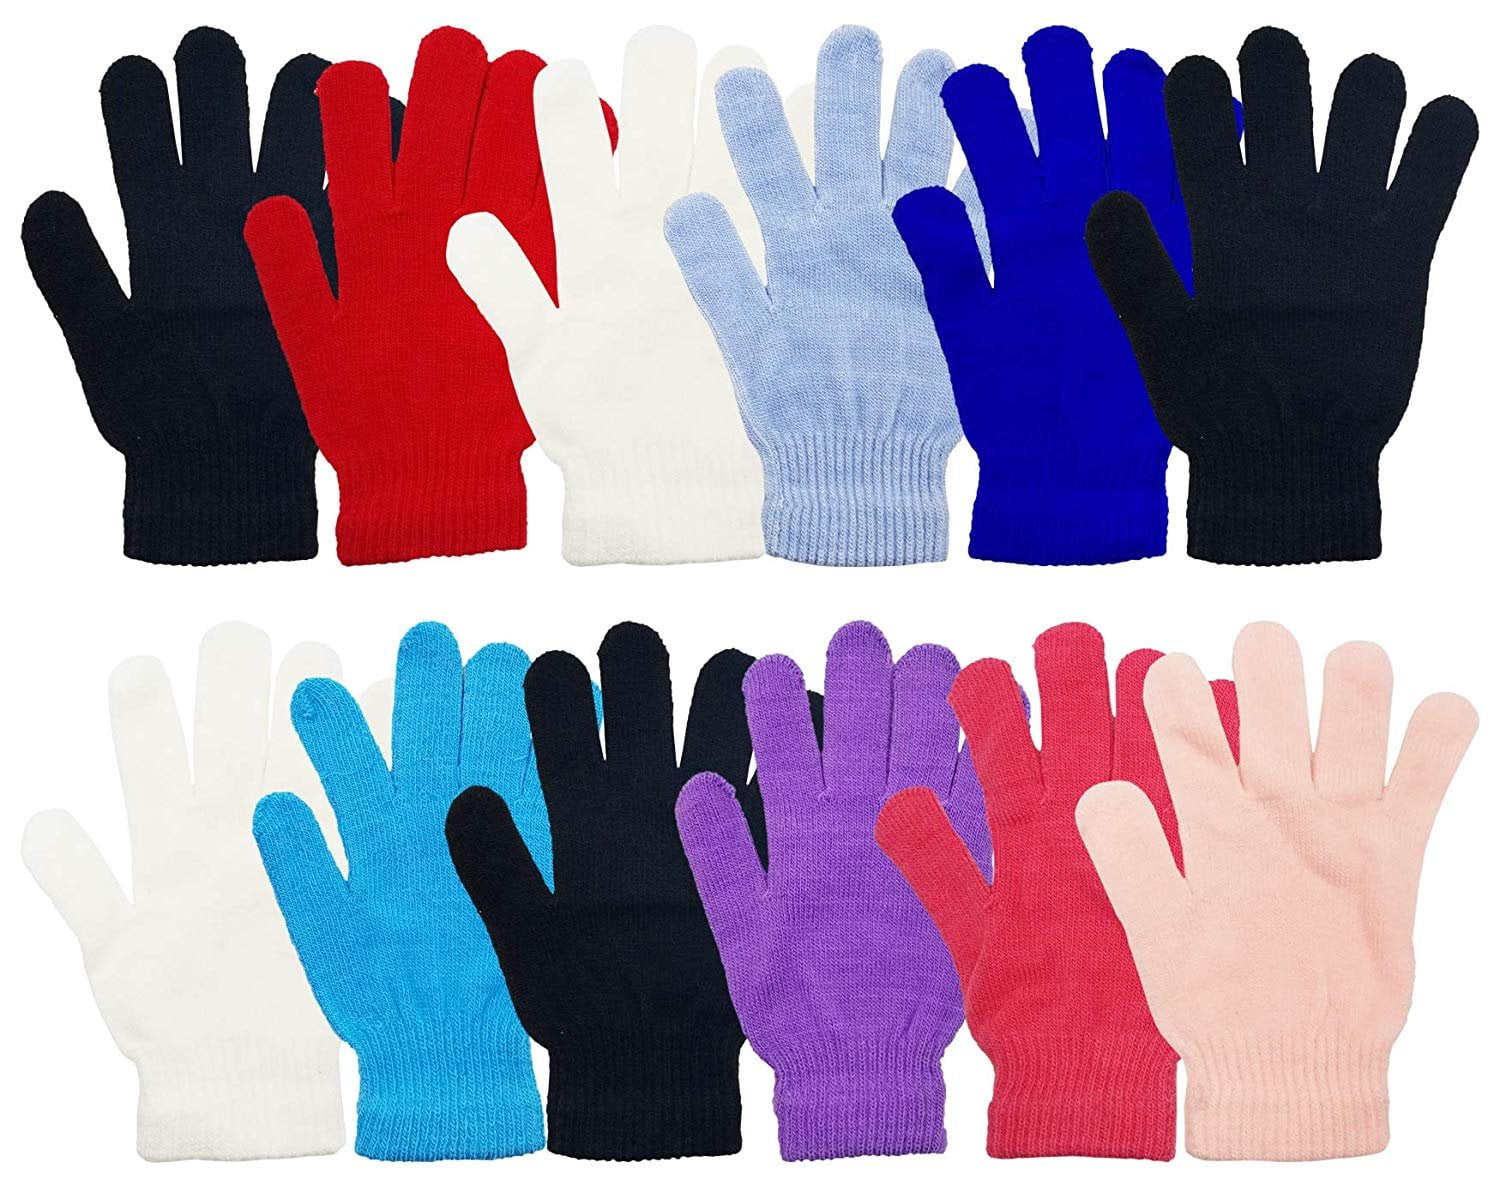 Winter Gloves Magic Knit Gloves Wholesale Pack One Size Fits Most OPT Brand 